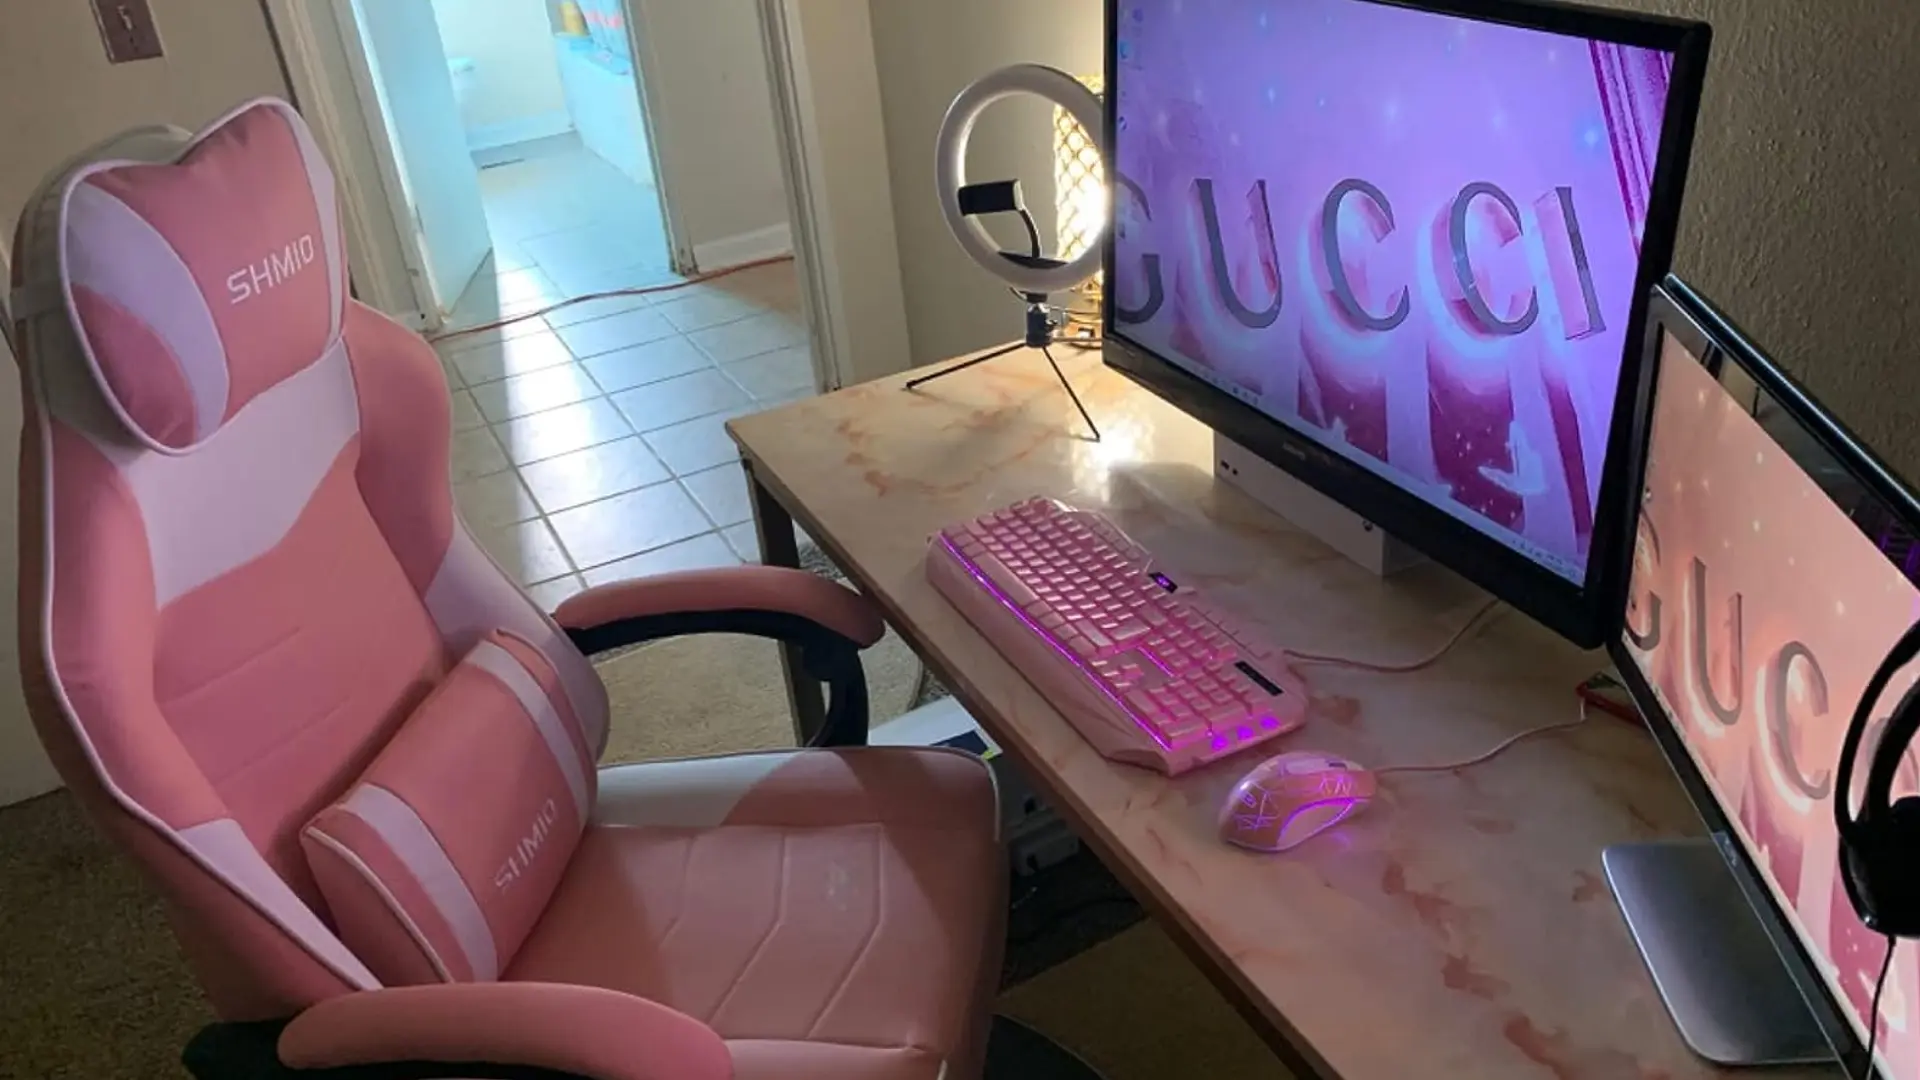 Pink Gaming Chair with Footrest Ergonomic Office Chair Desk